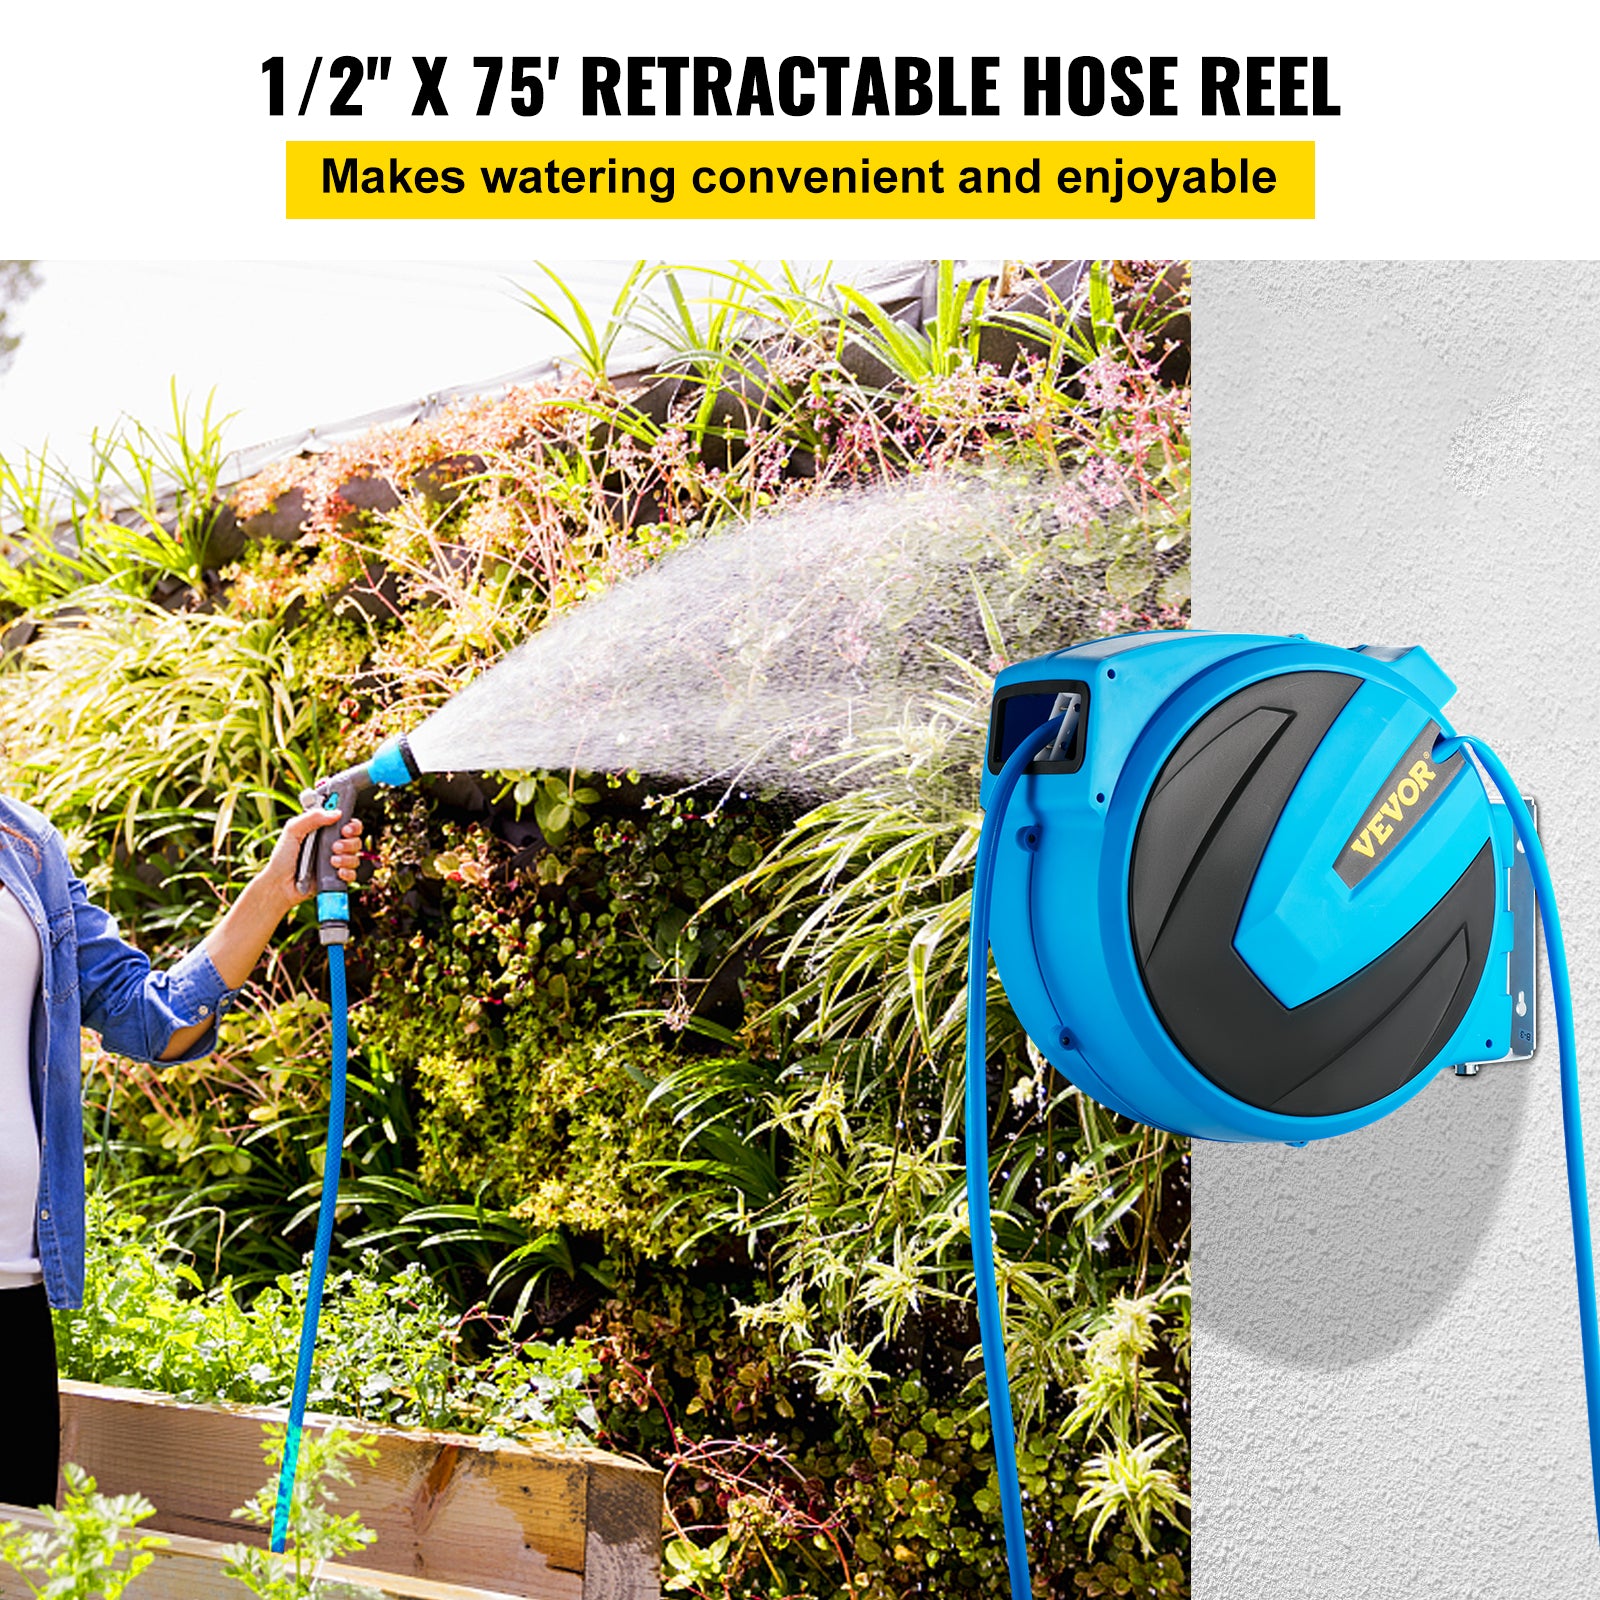 VEVOR Retractable Hose Reel， 1/2 inch x 75 ft， Any Length Lock and Automatic Rewind Water Hose， Wall Mounted Garden Hose Reel With 180° Swivel Bracket and 7 Pattern Hose Nozzle， Blue